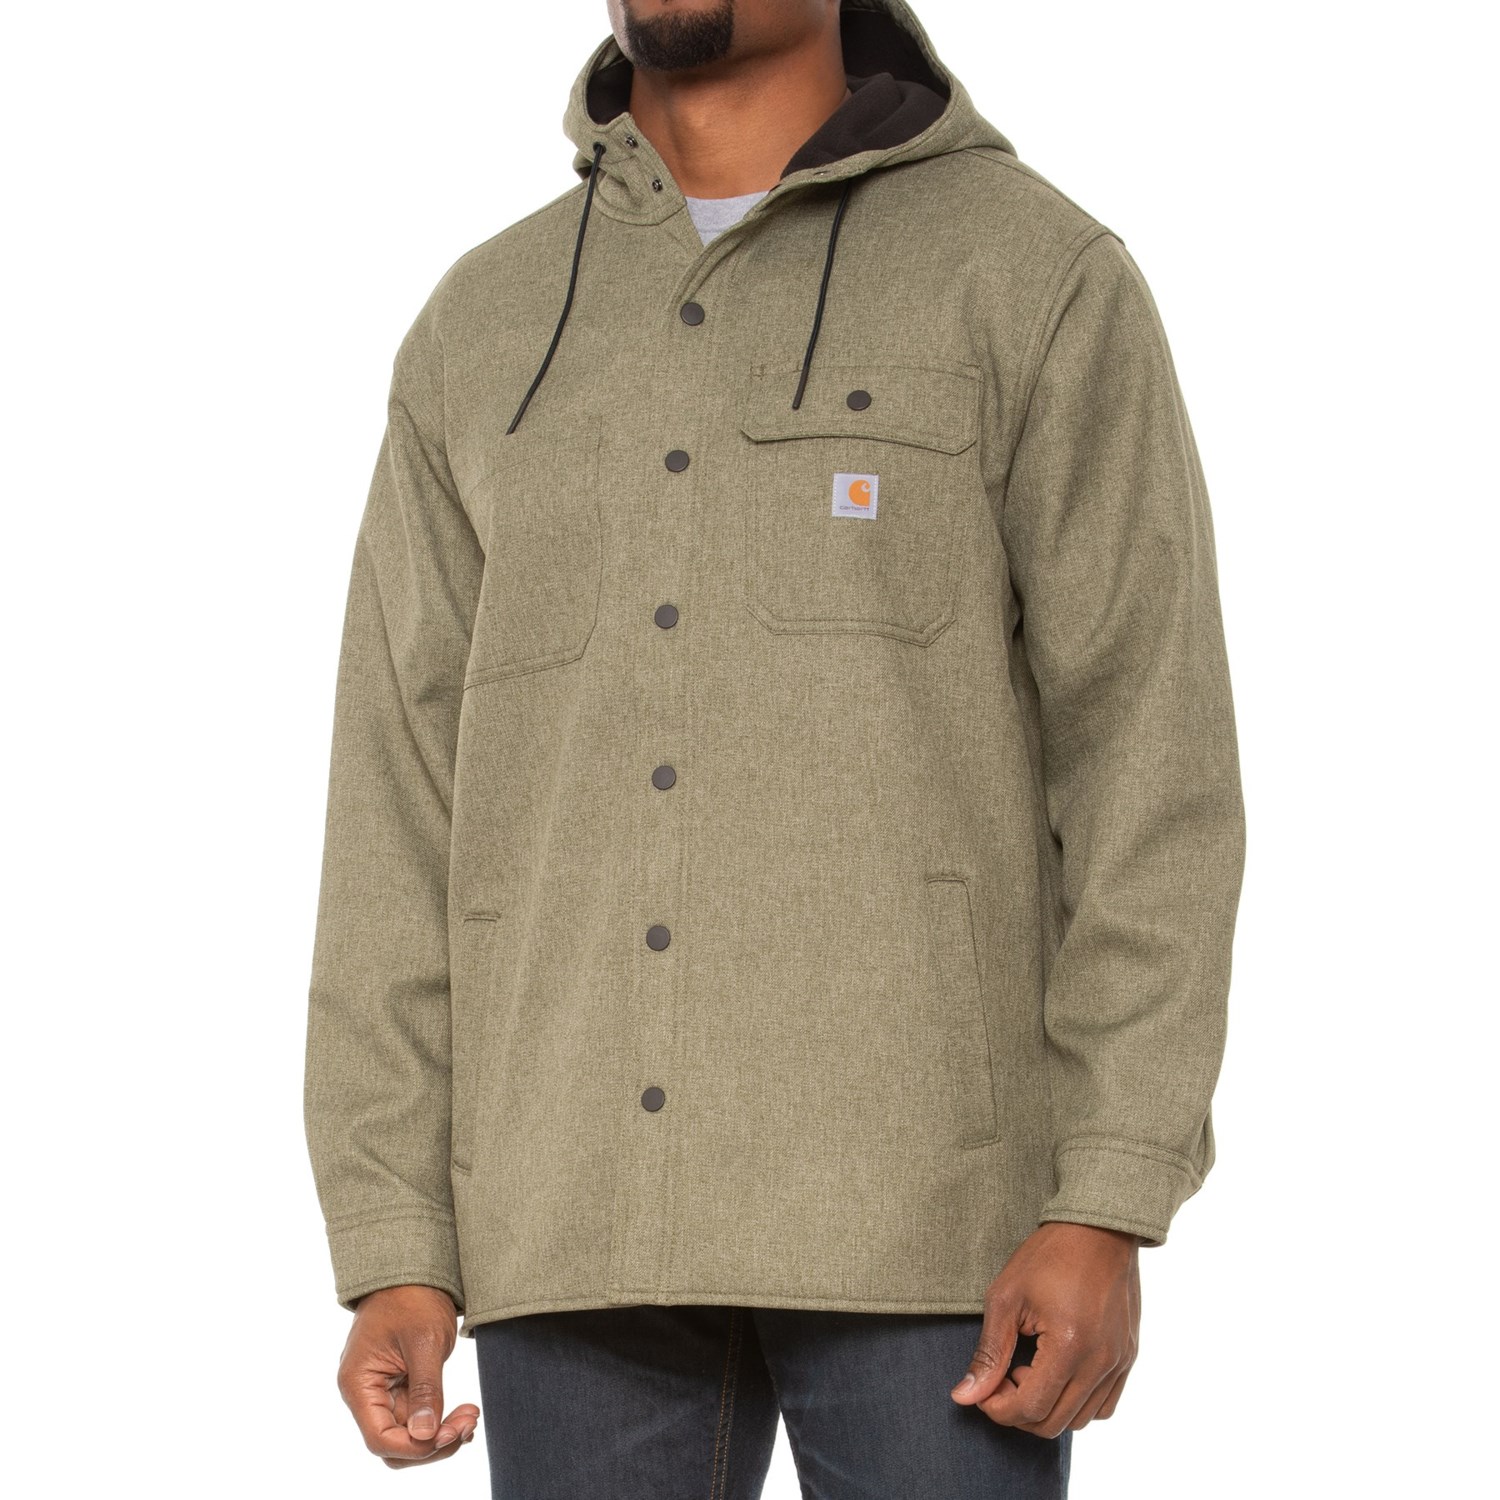 Carhartt 105022 Relaxed Fit Hooded Shirt Jacket